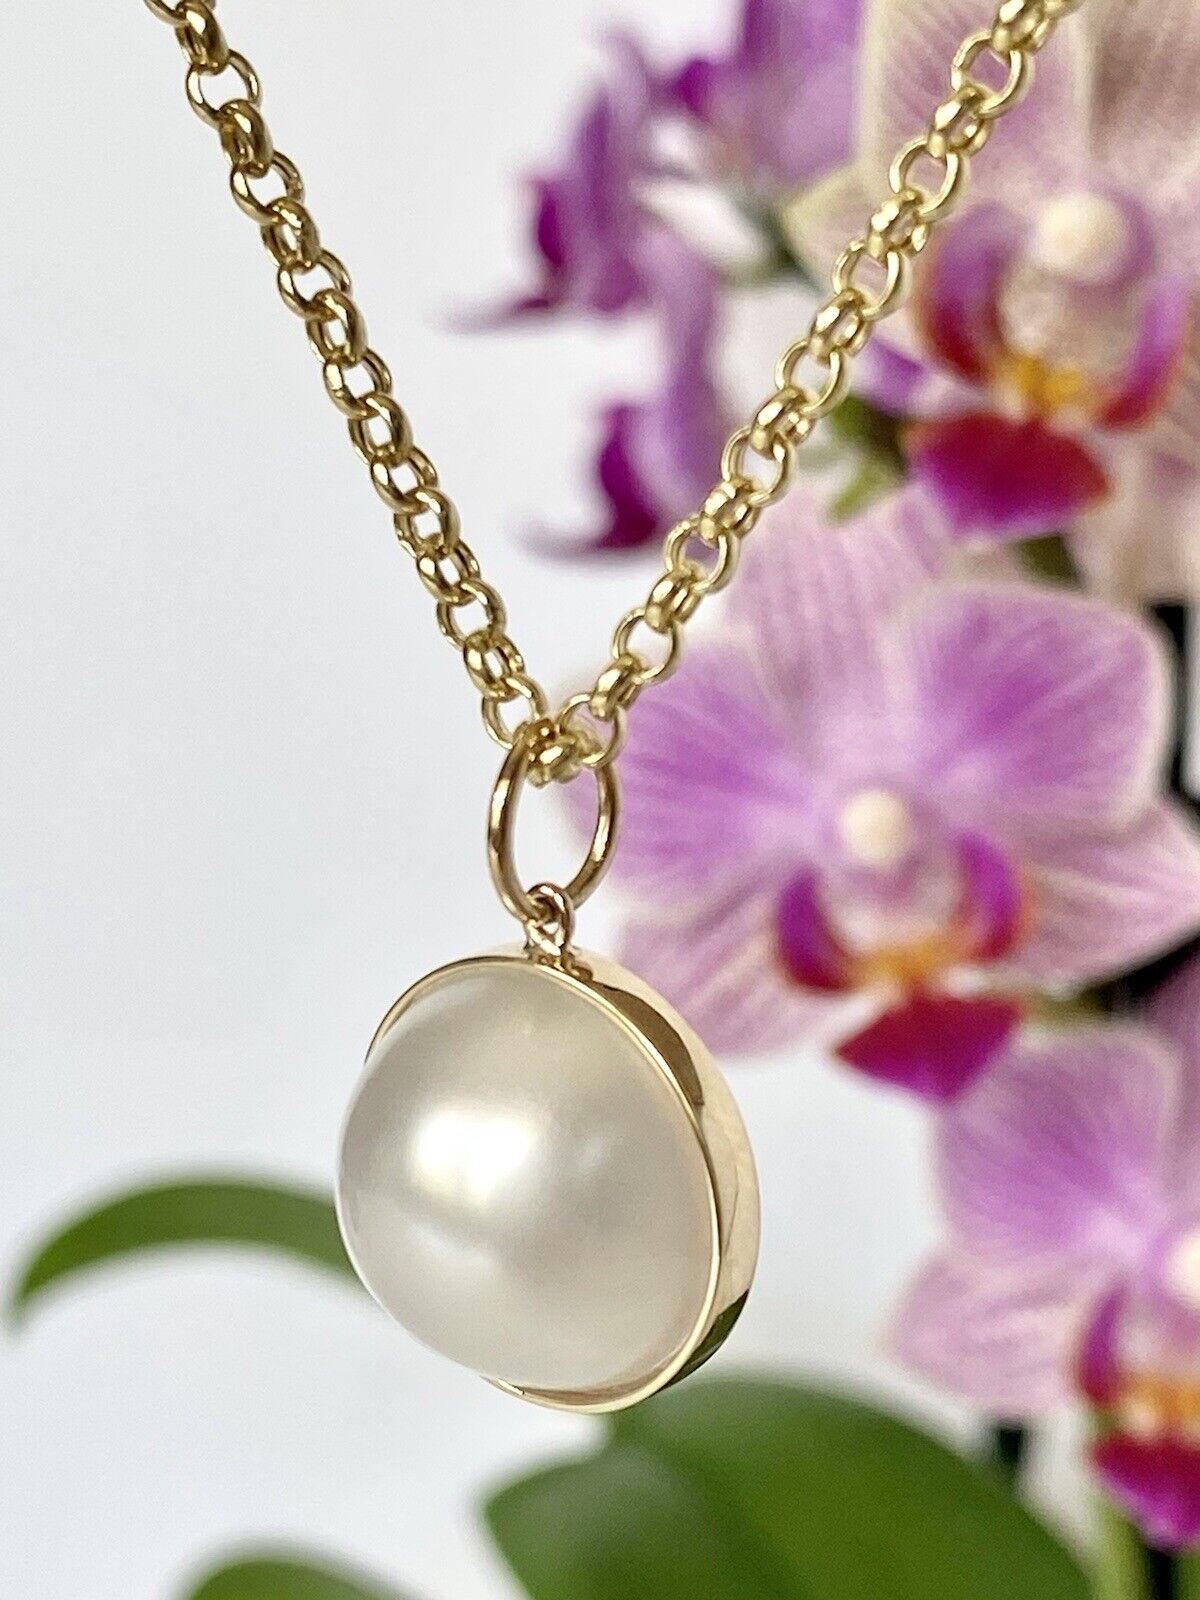 Genuine White Mabe Pearl (13mm) Solid 14K Yellow Gold Pendant, New